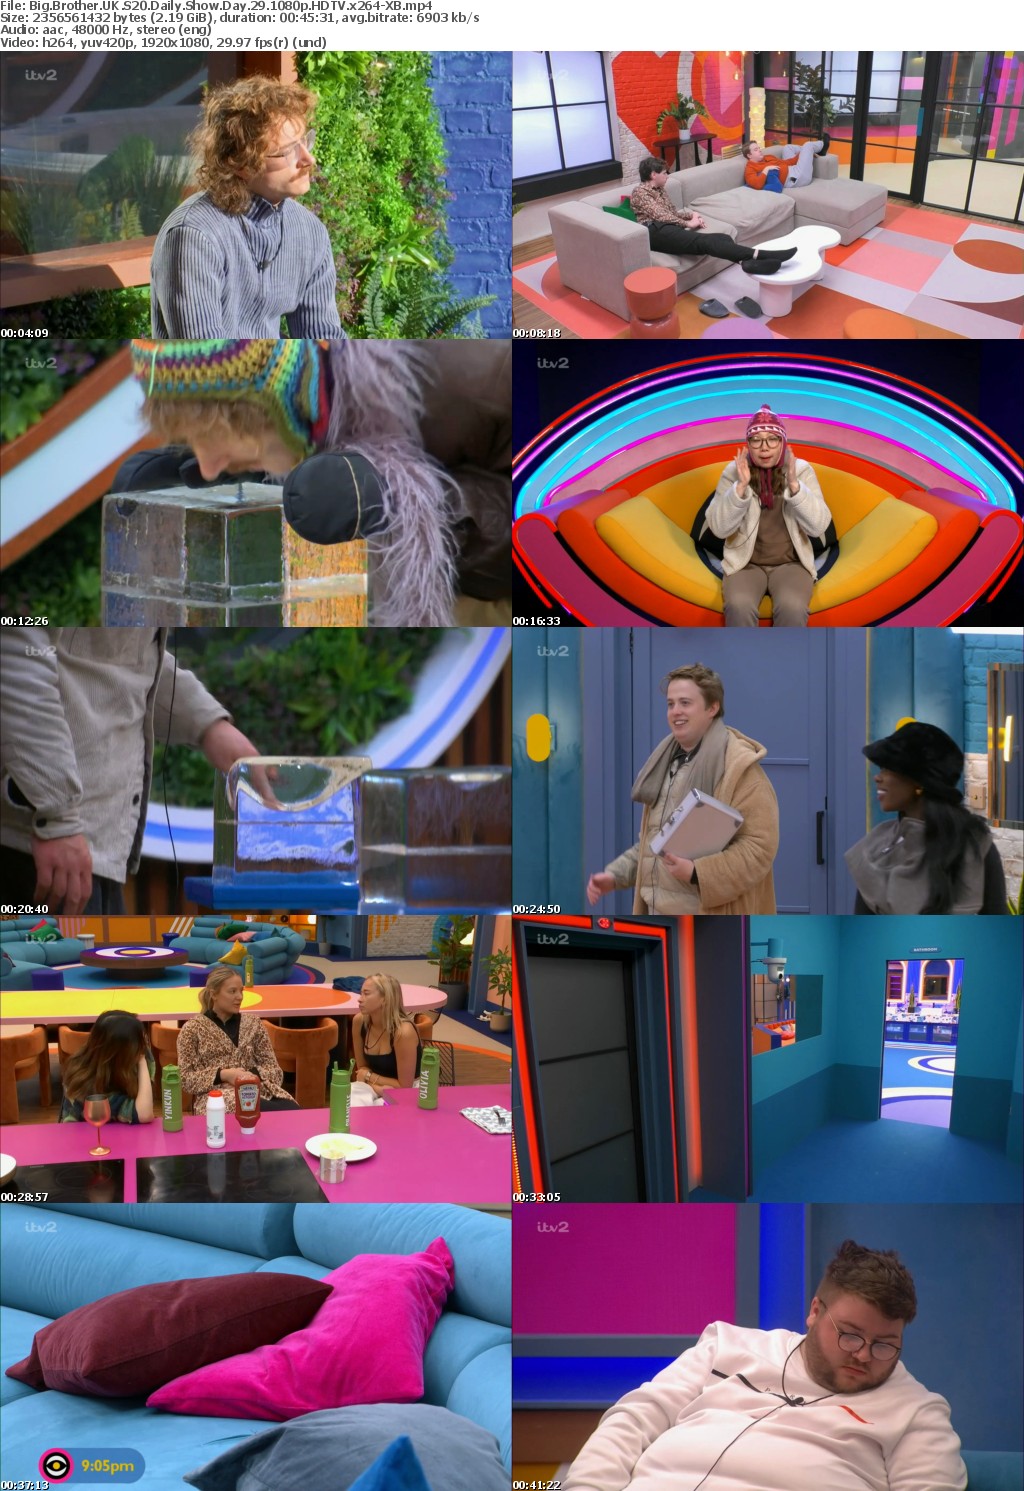 Big Brother UK S20 Daily Show Day 29 1080p HDTV x264-XB